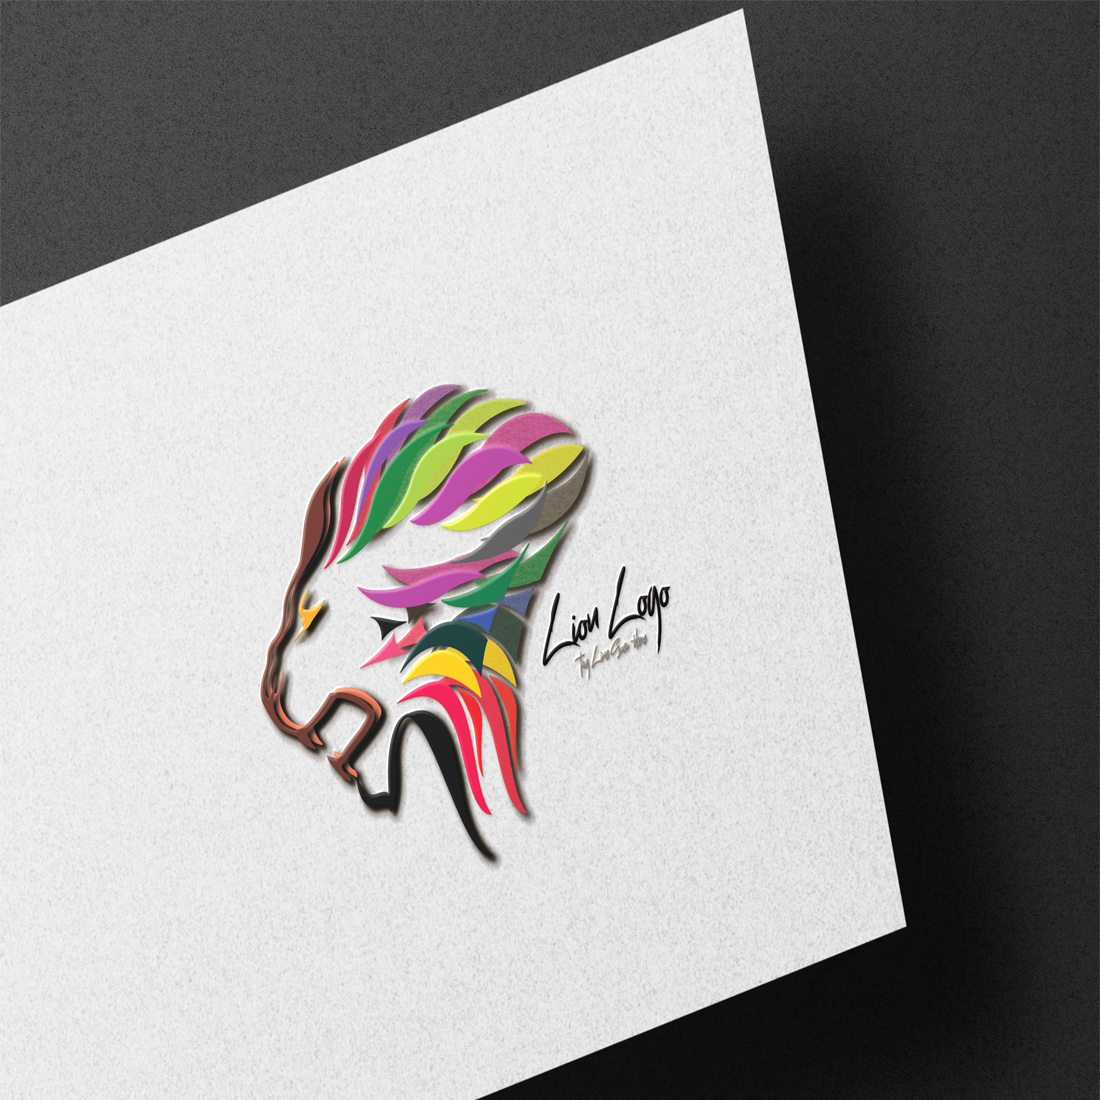 Colorful lion logo on a white paper.